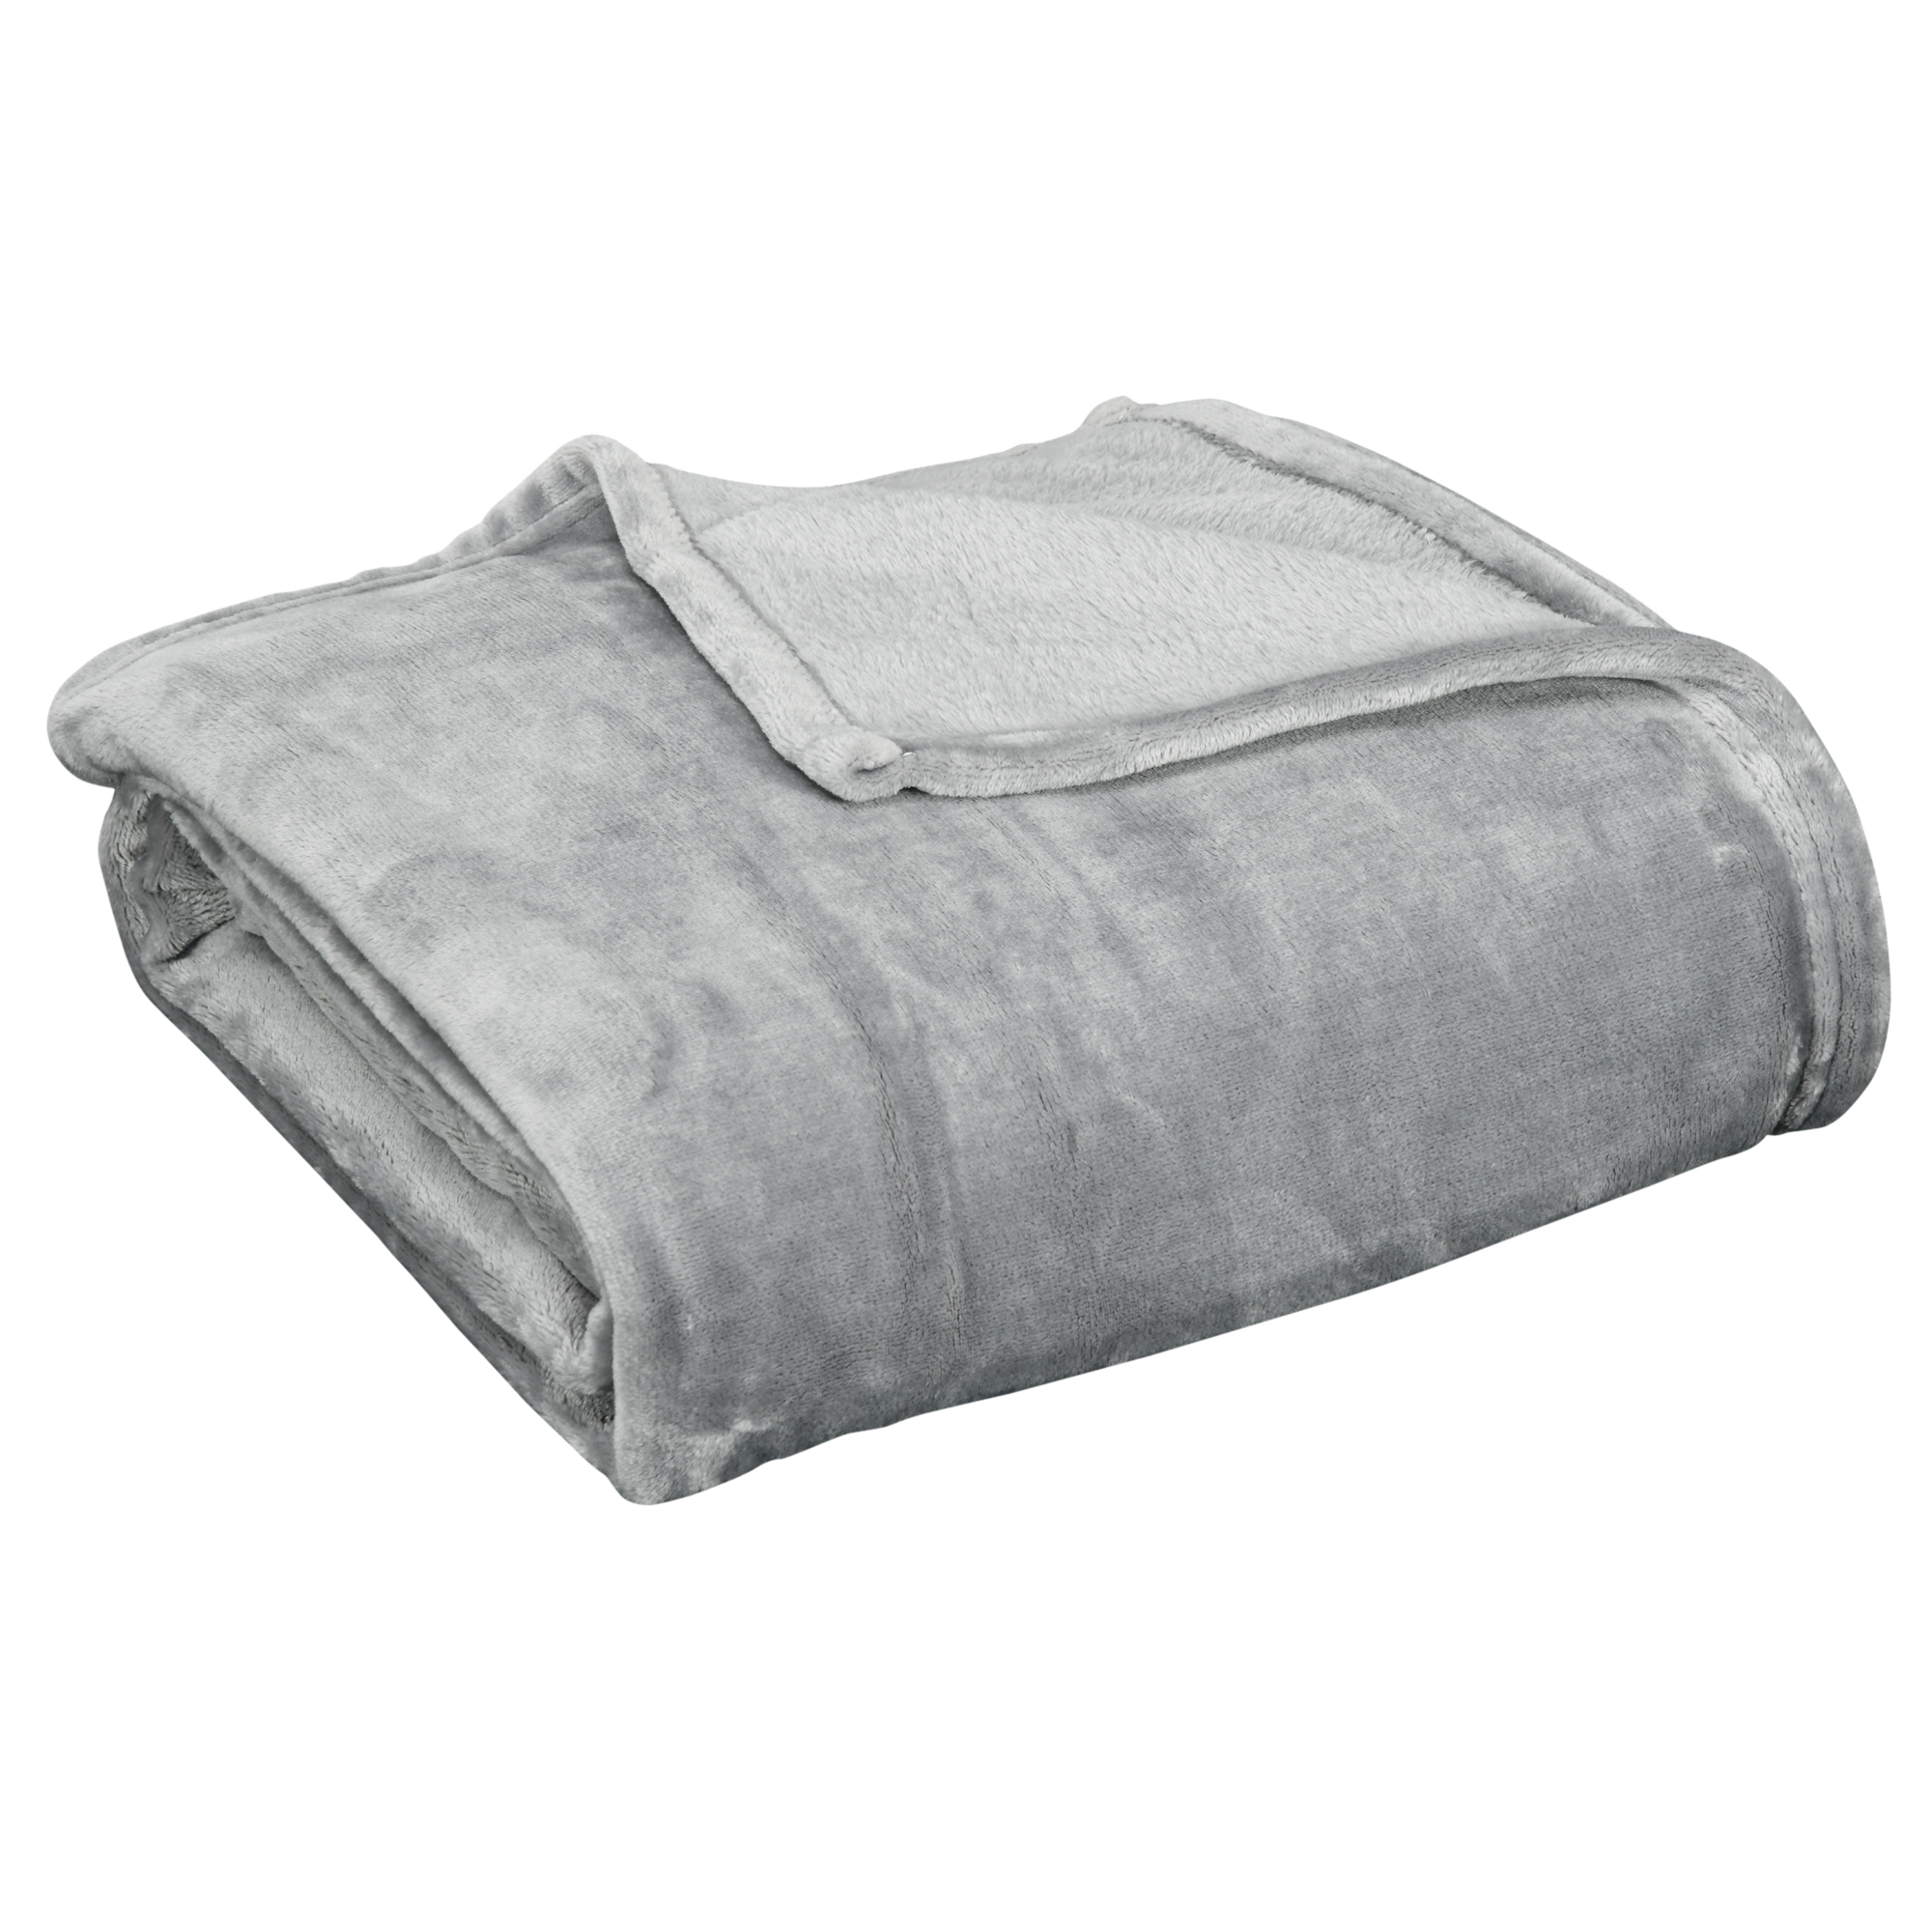 HOMCOM Flannel Blanket 330 GSM Reversible for Indoor and Outdoor Use